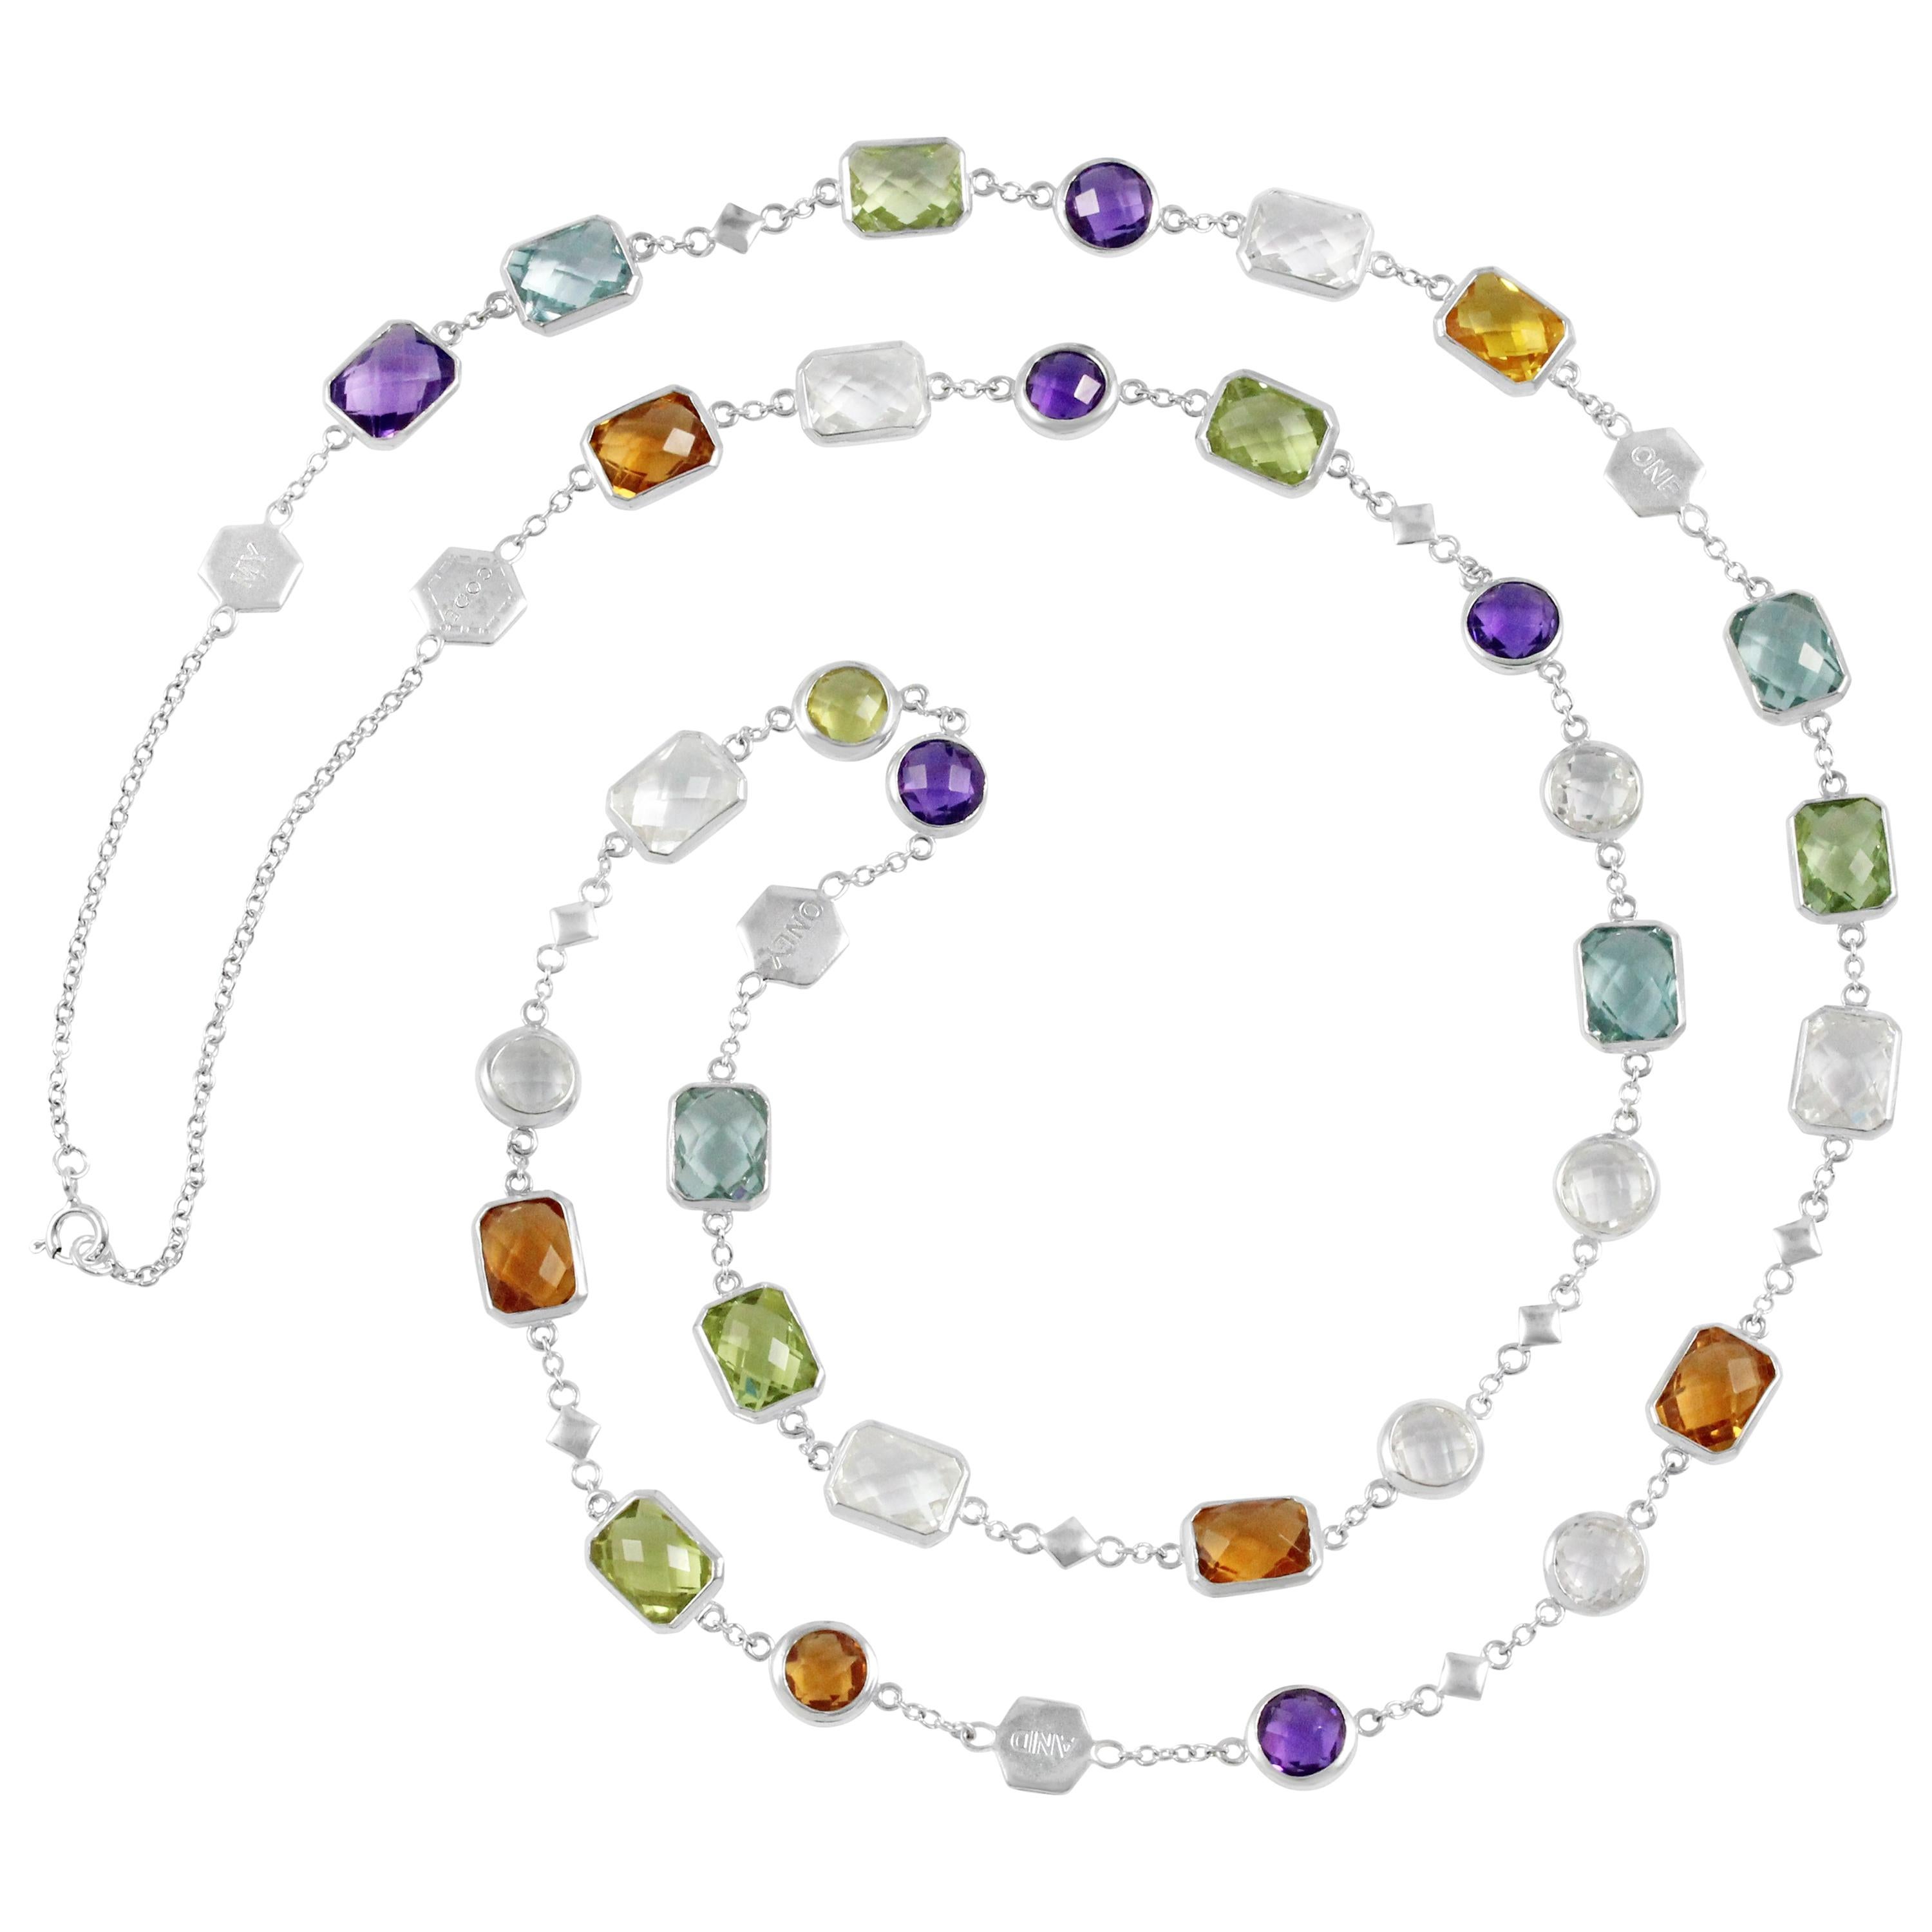 Customizable Code By Edge Multi-Gem Necklace - "My One And Only" in Morse Code For Sale